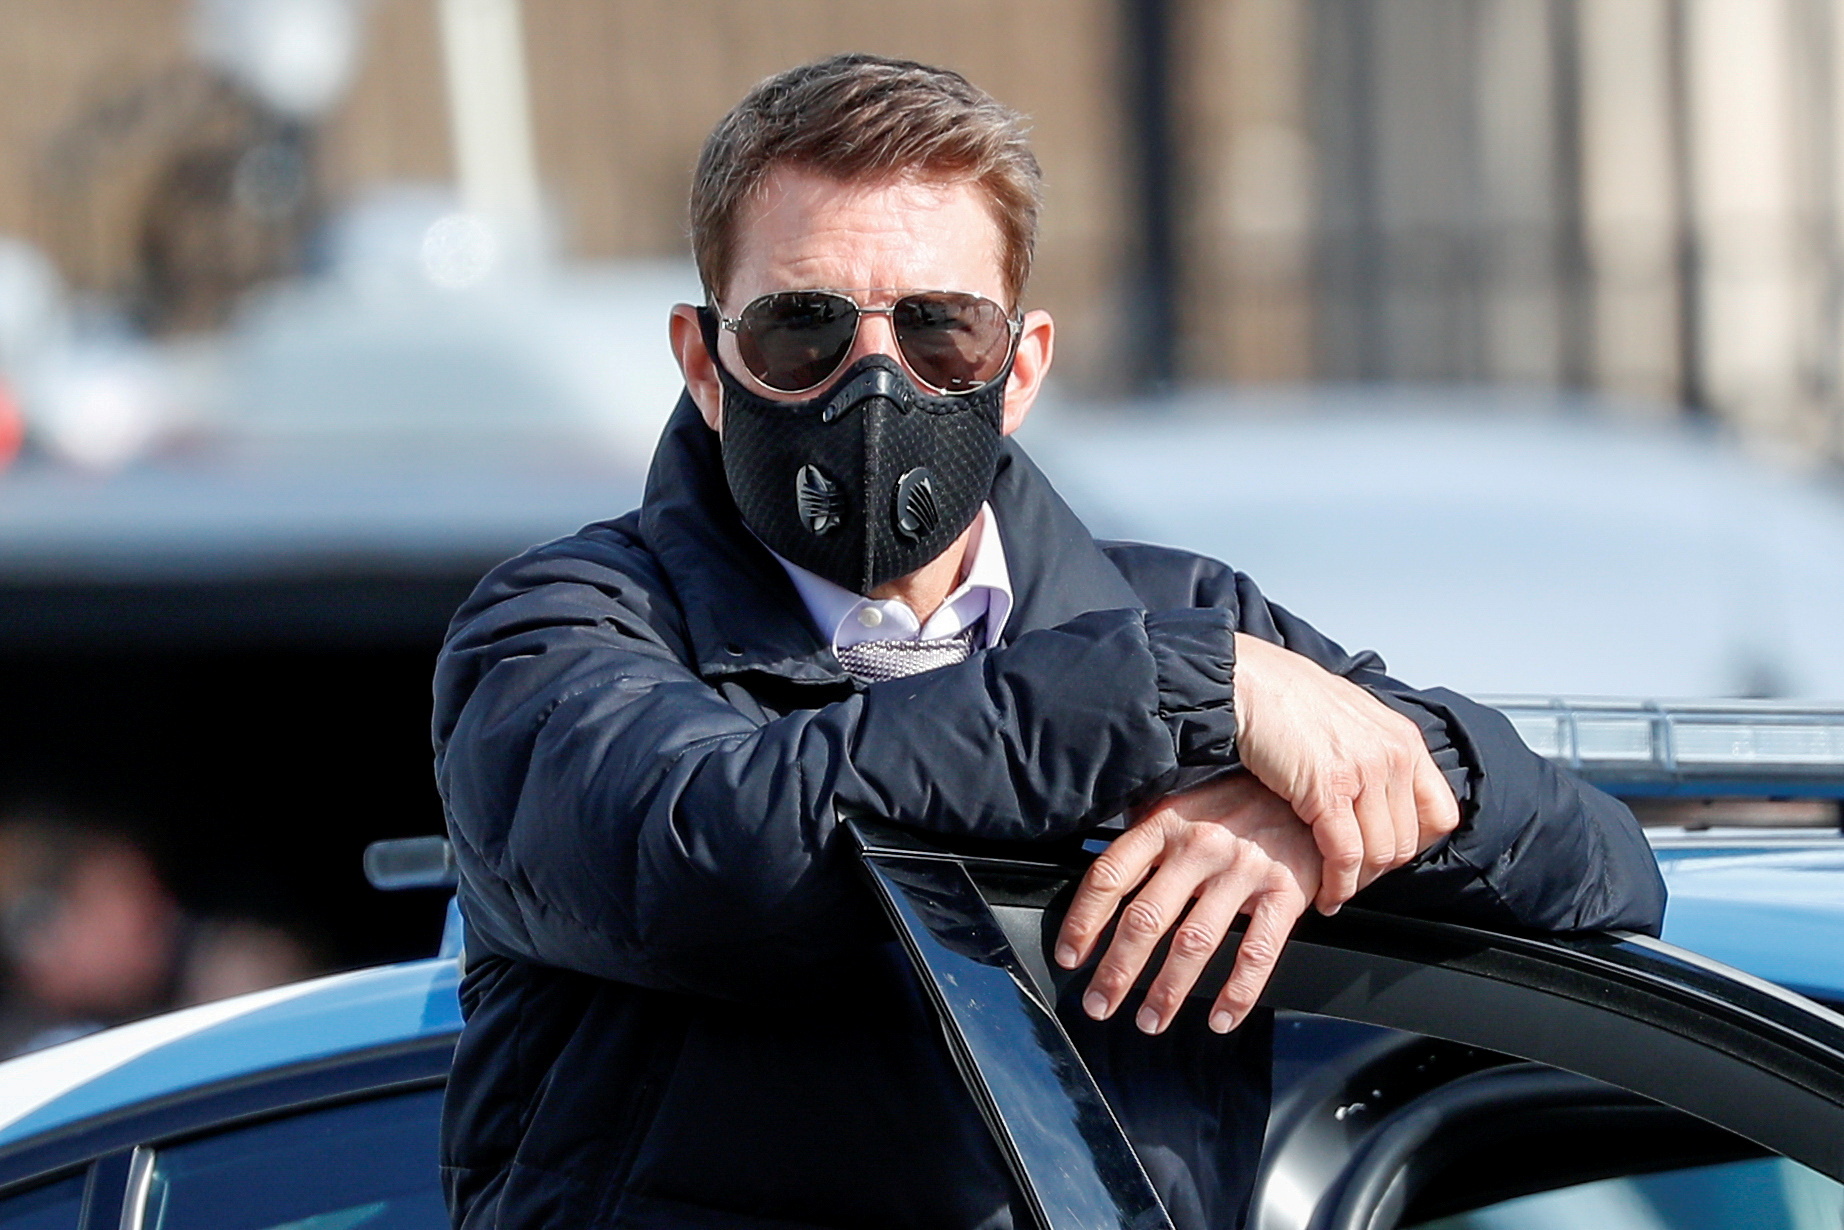 Tom Cruise shows off latest daredevil 'Mission: Impossible' stunt